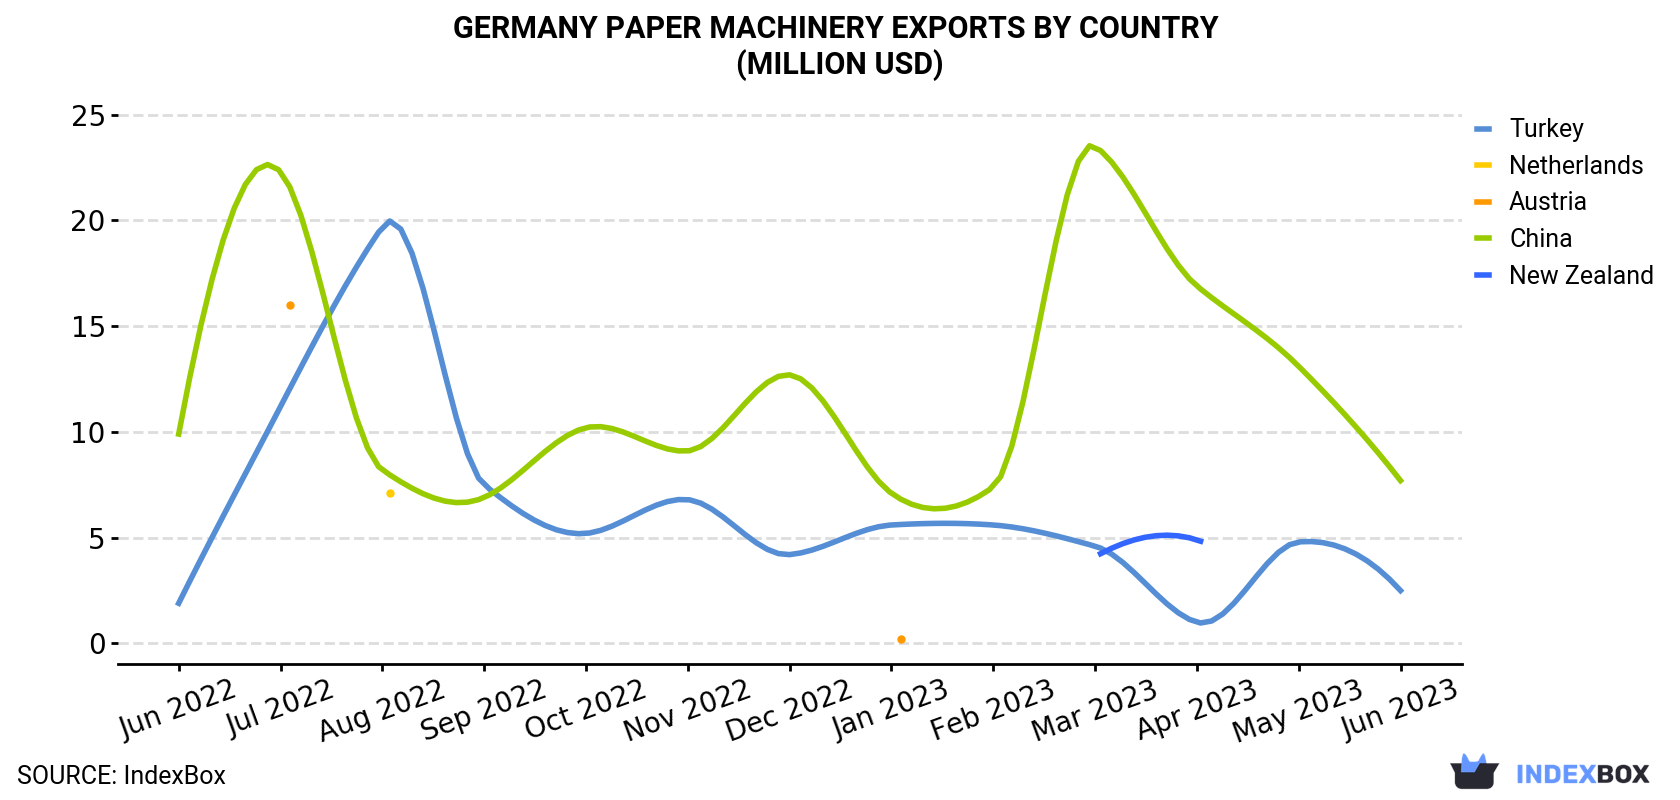 Germany Paper Machinery Exports By Country (Million USD)